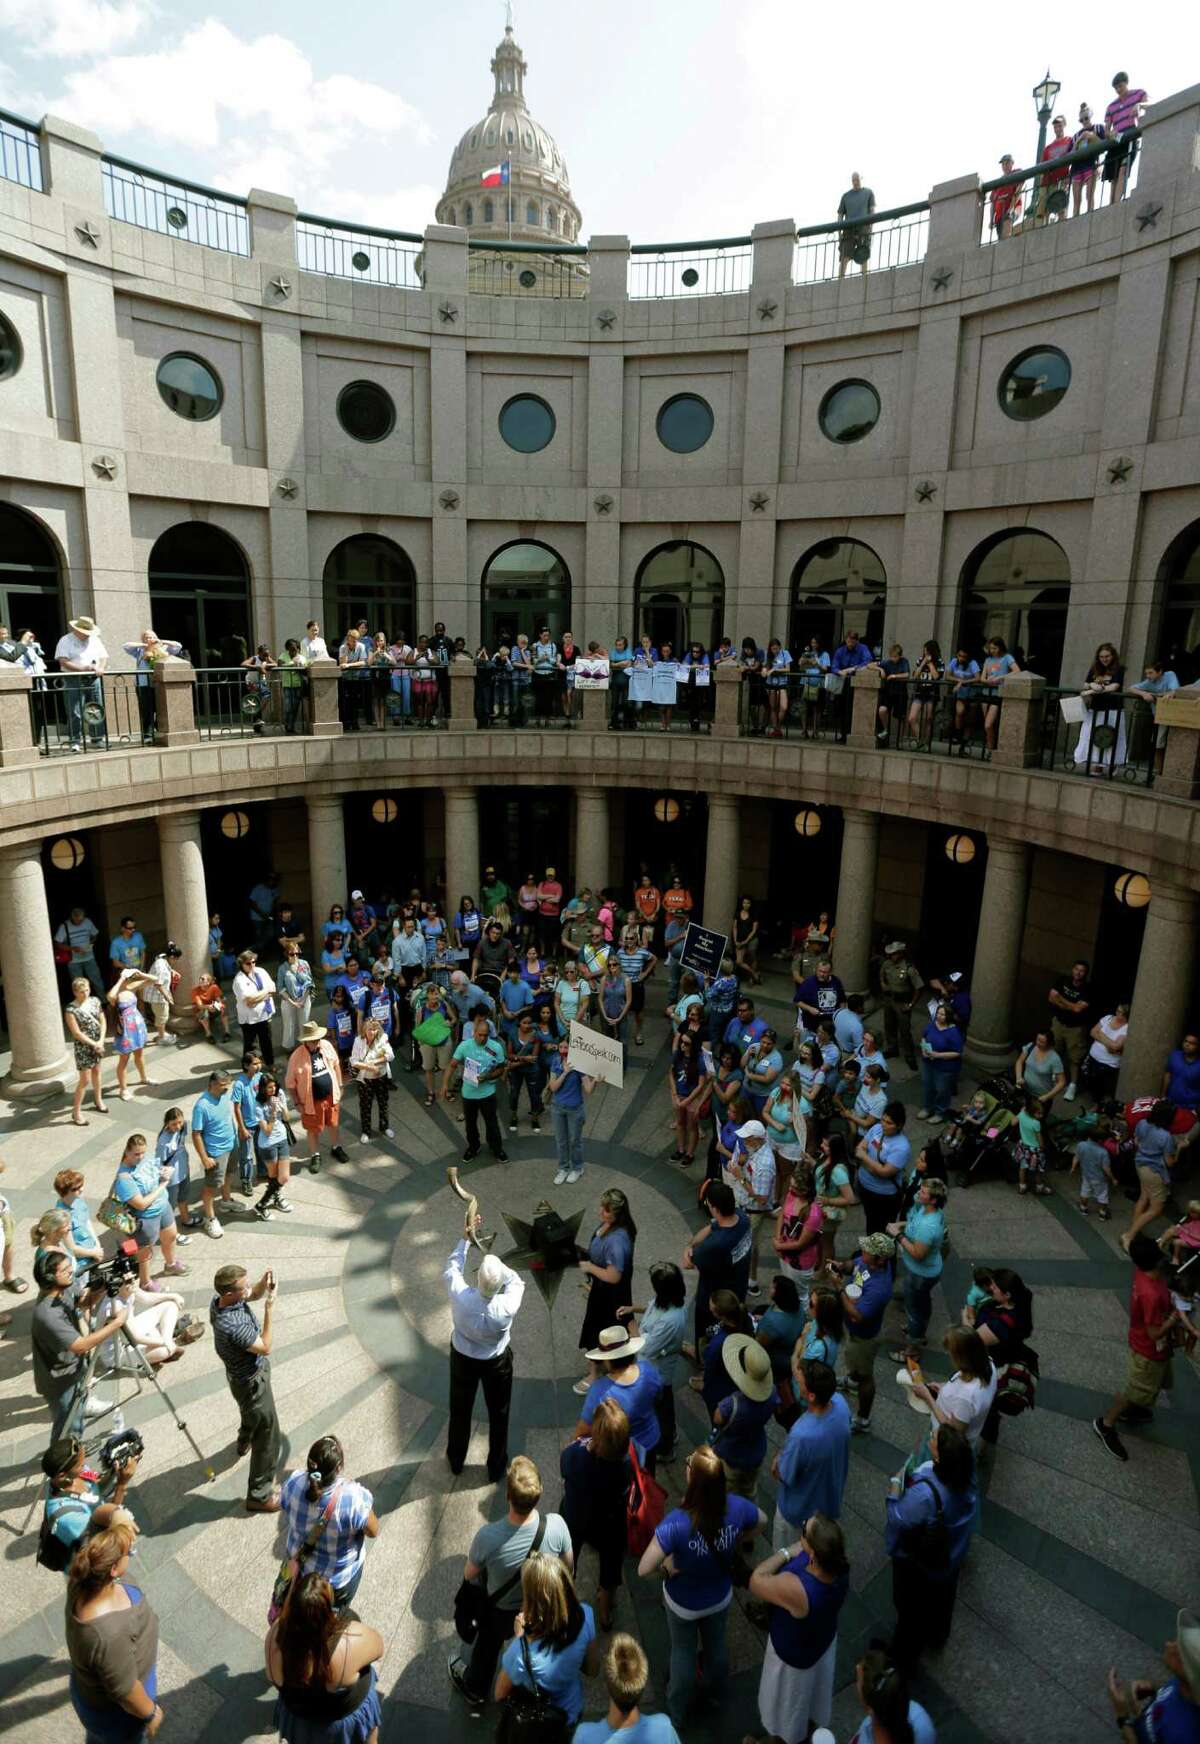 A man blows a horn as supporters and opponents of an abortion bill gather in a near a hearing for the bill at the state capitol, Tuesday, July 2, 2013, in Austin, Texas. Gov. Rick Perry has called lawmakers back for another special session with abortion on the top of the agenda.